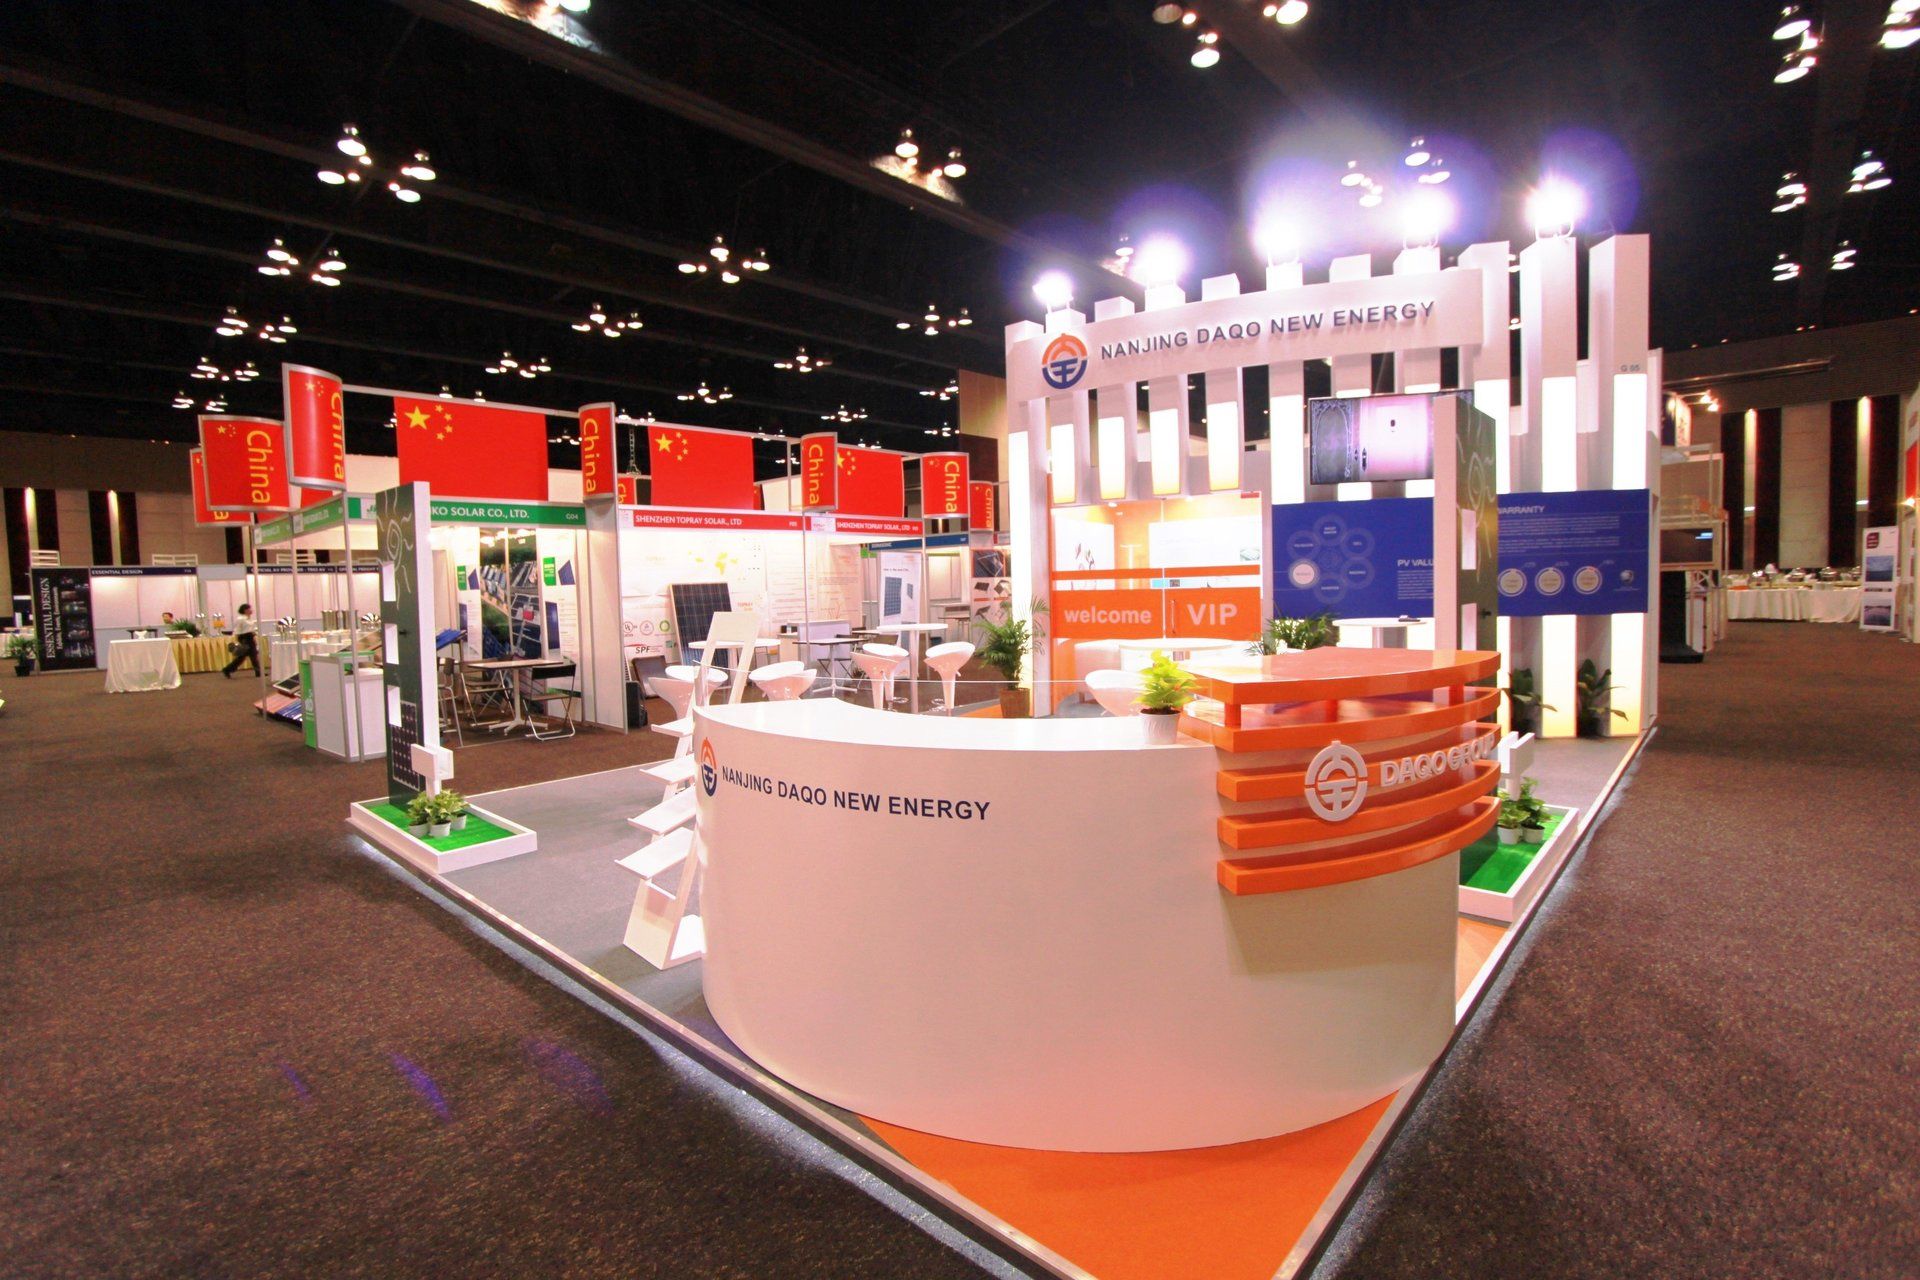 DAQO New Energy Corp @ Carbon Forum Asia 2013. Booth designed and built by Essential Global Fairs.